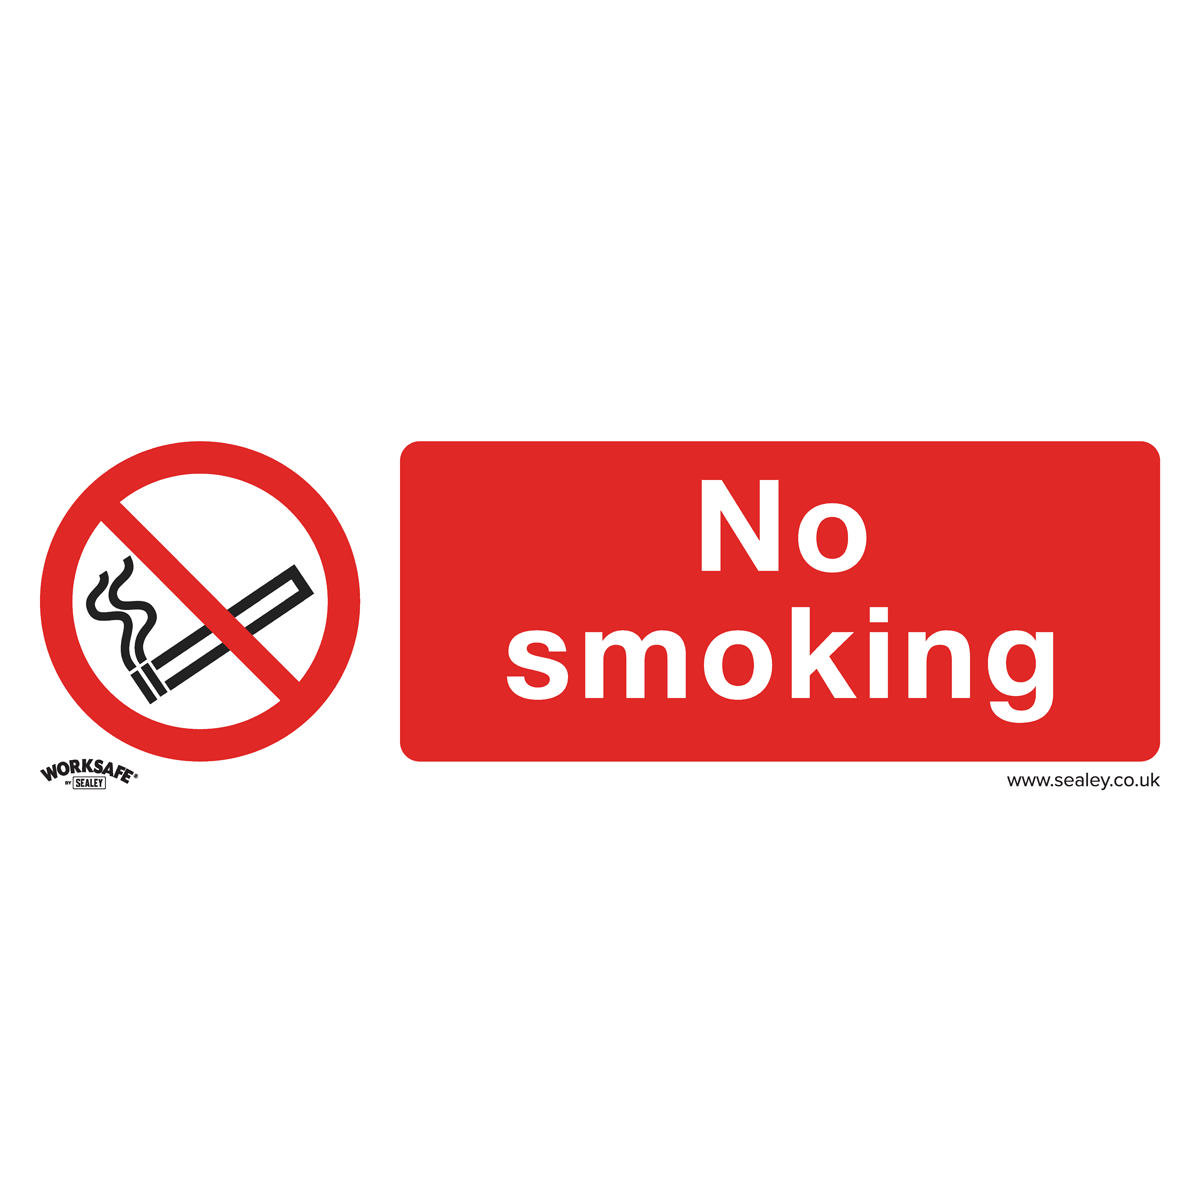 Prohibition Safety Sign - No Smoking - Self-Adhesive Vinyl - Pack of 10